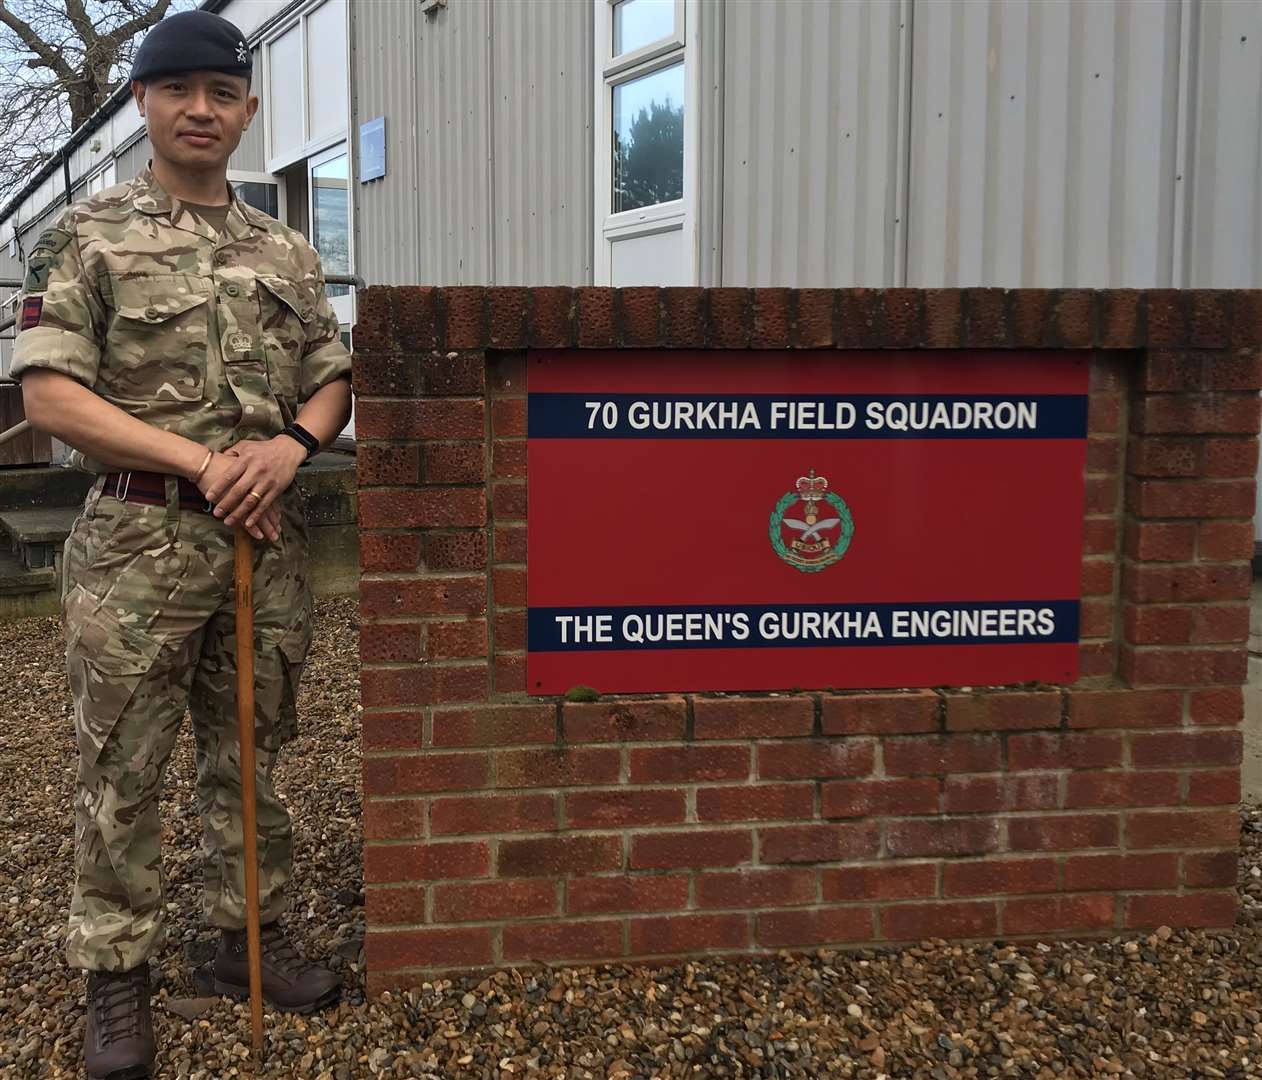 Invicta Park is home to the Queen's Gurkha Engineers